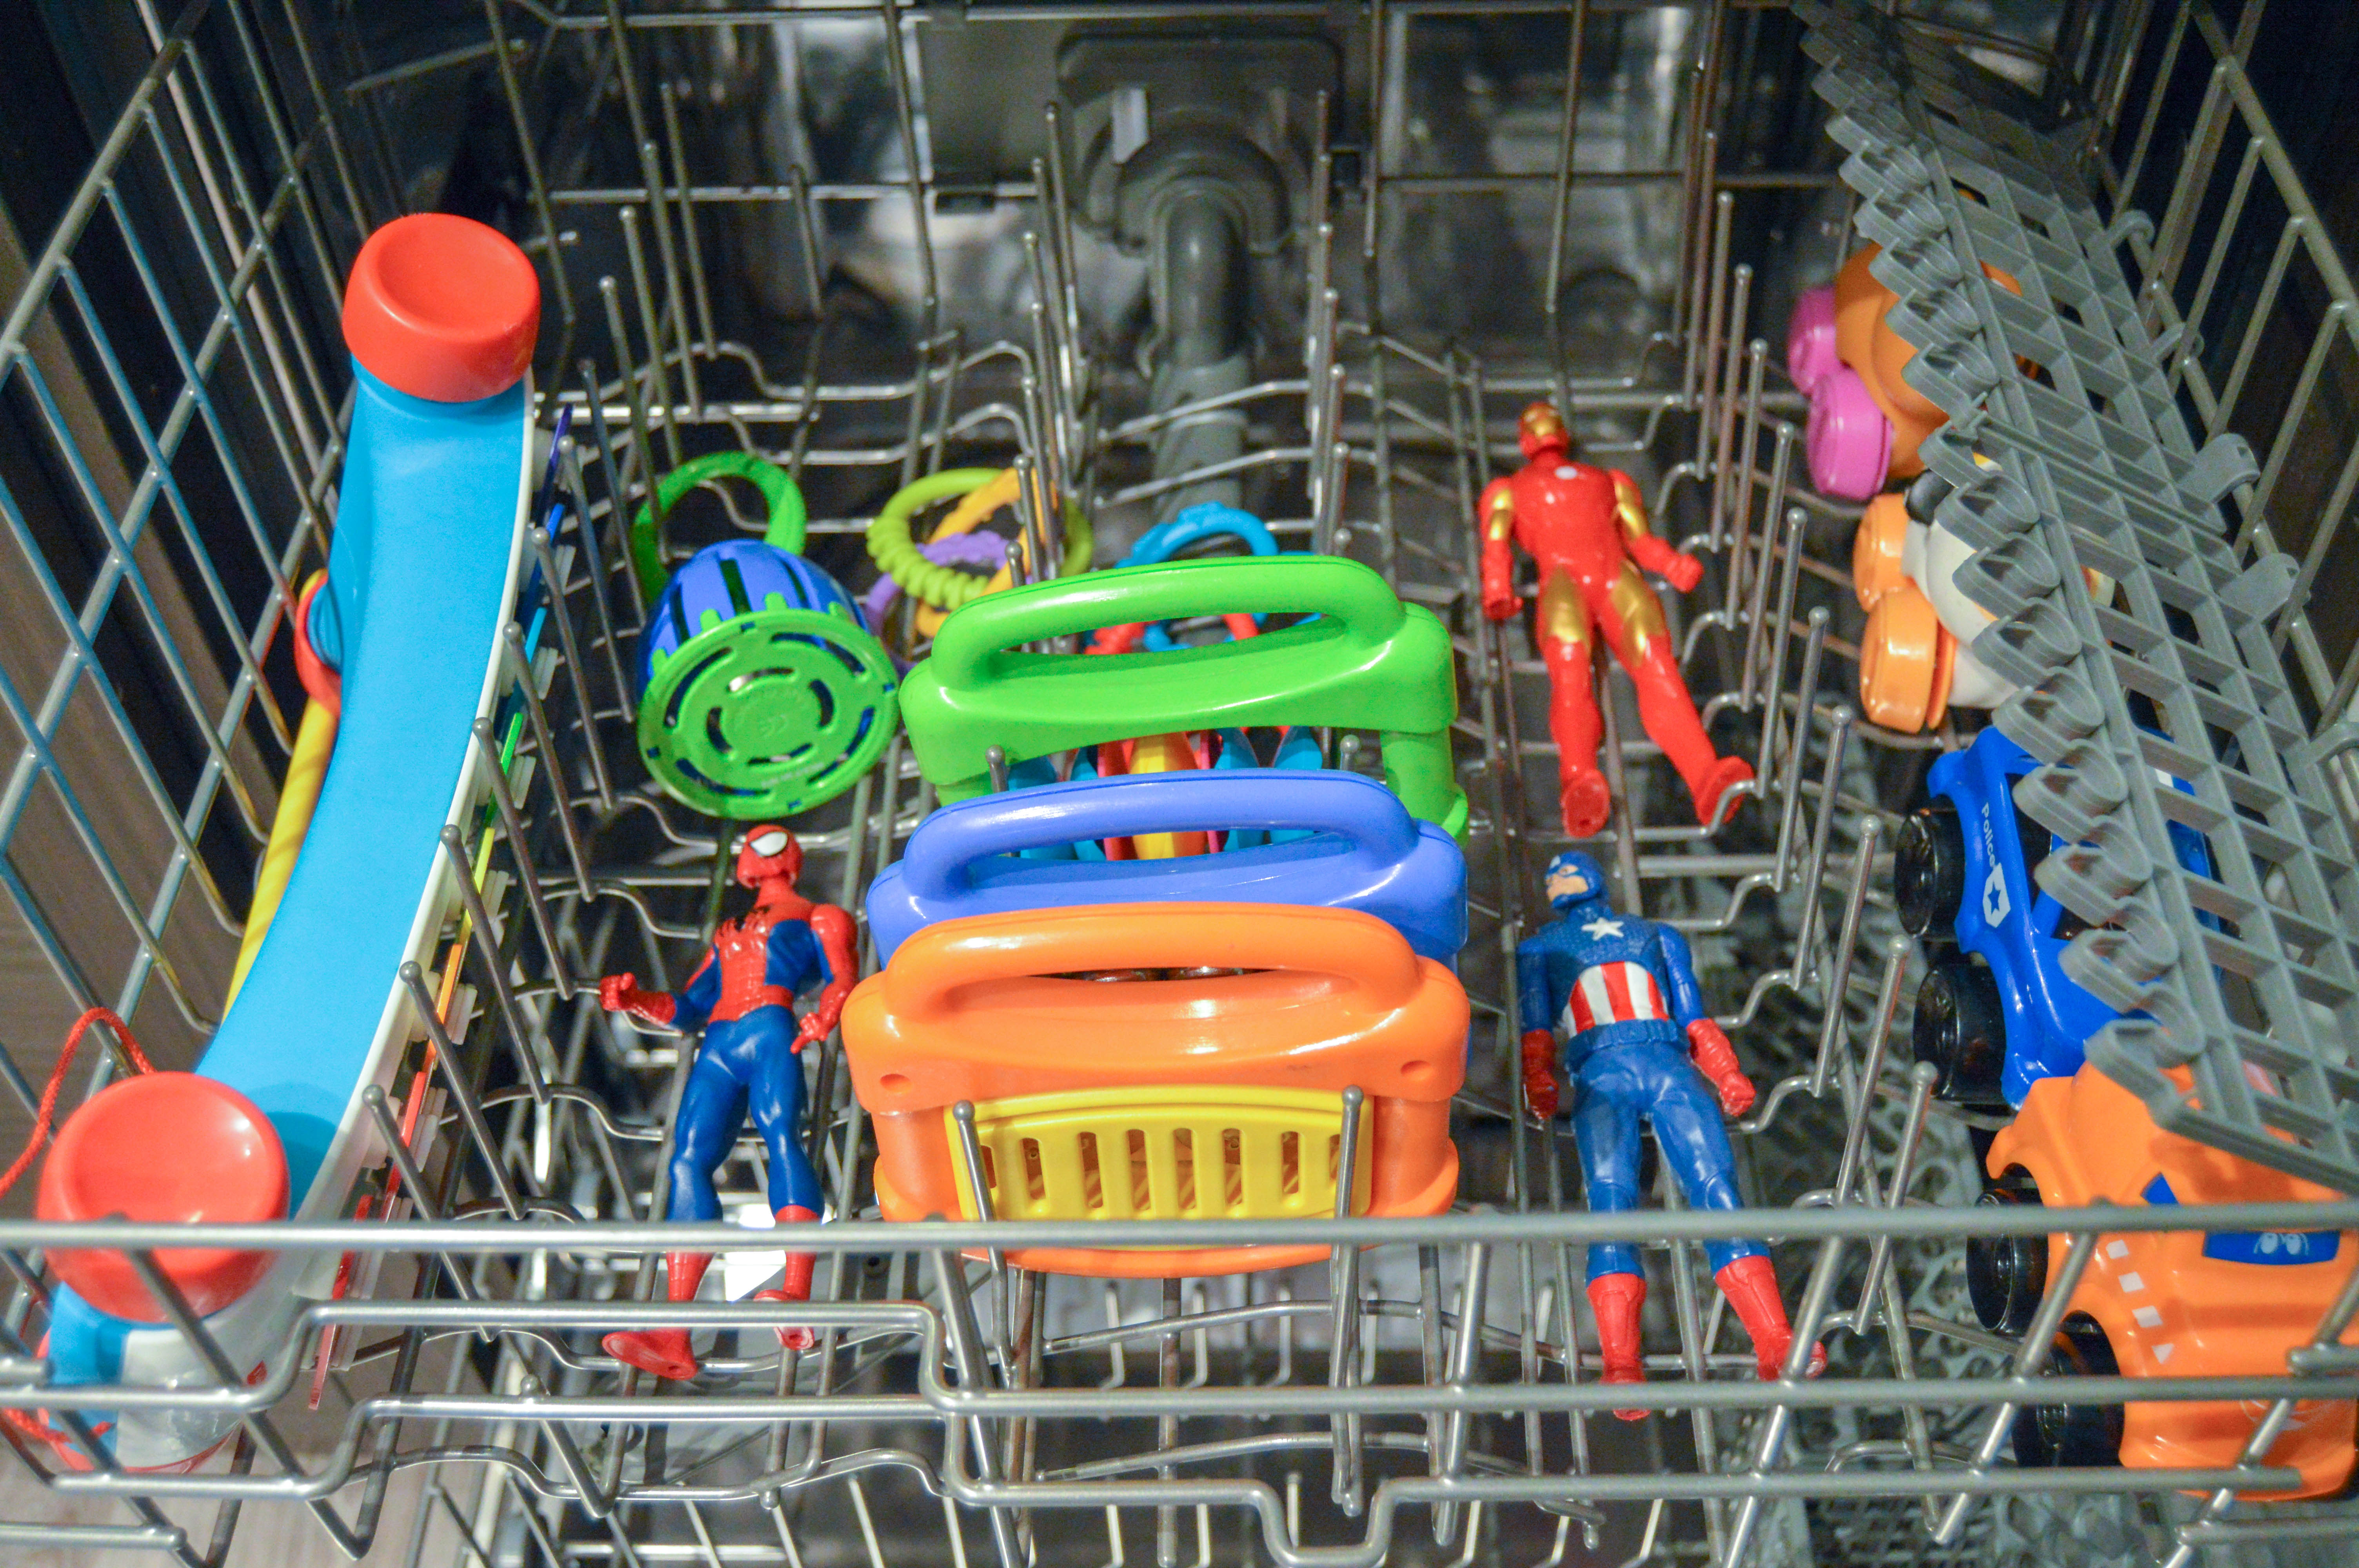 Kids Toys: Seven surprising things you can wash in the dishwasher. Kitchen dishwasher hack for cleaning normal objects around the home like kids toys, toothbrushes, and tools. Cool kitchen hacks and tips.